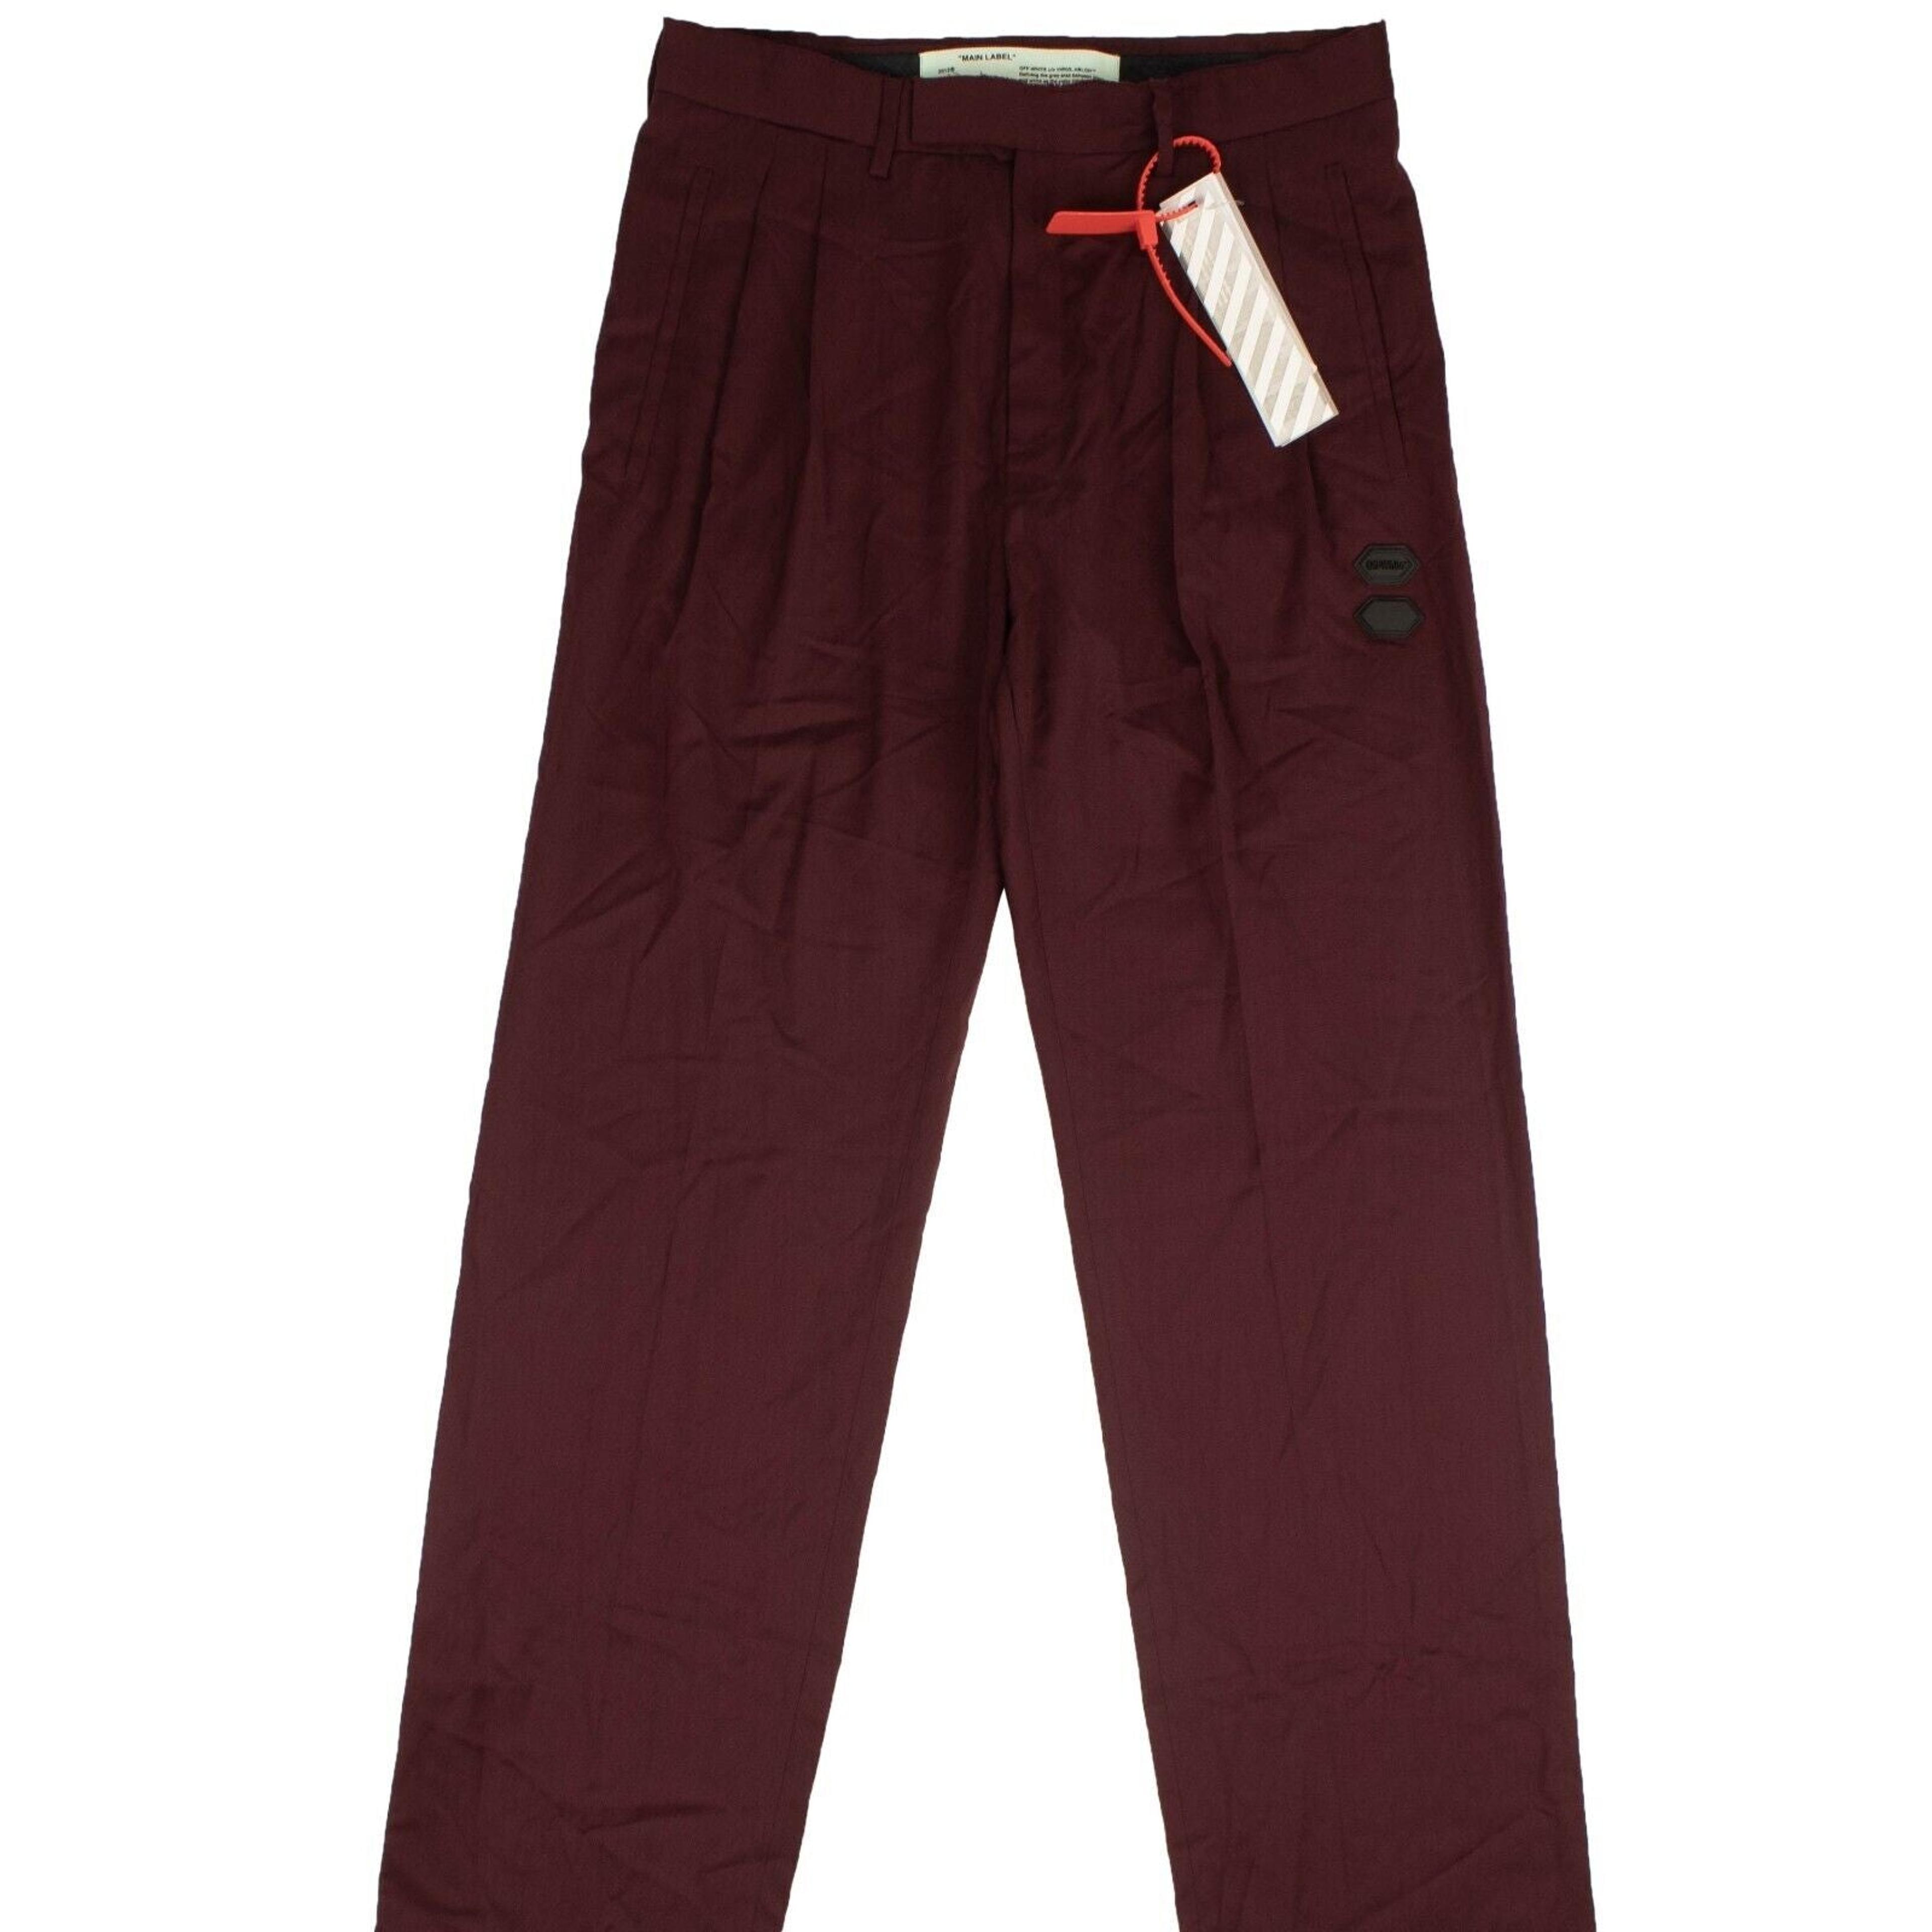 Alternate View 1 of Burgundy Oversized Suit Pants